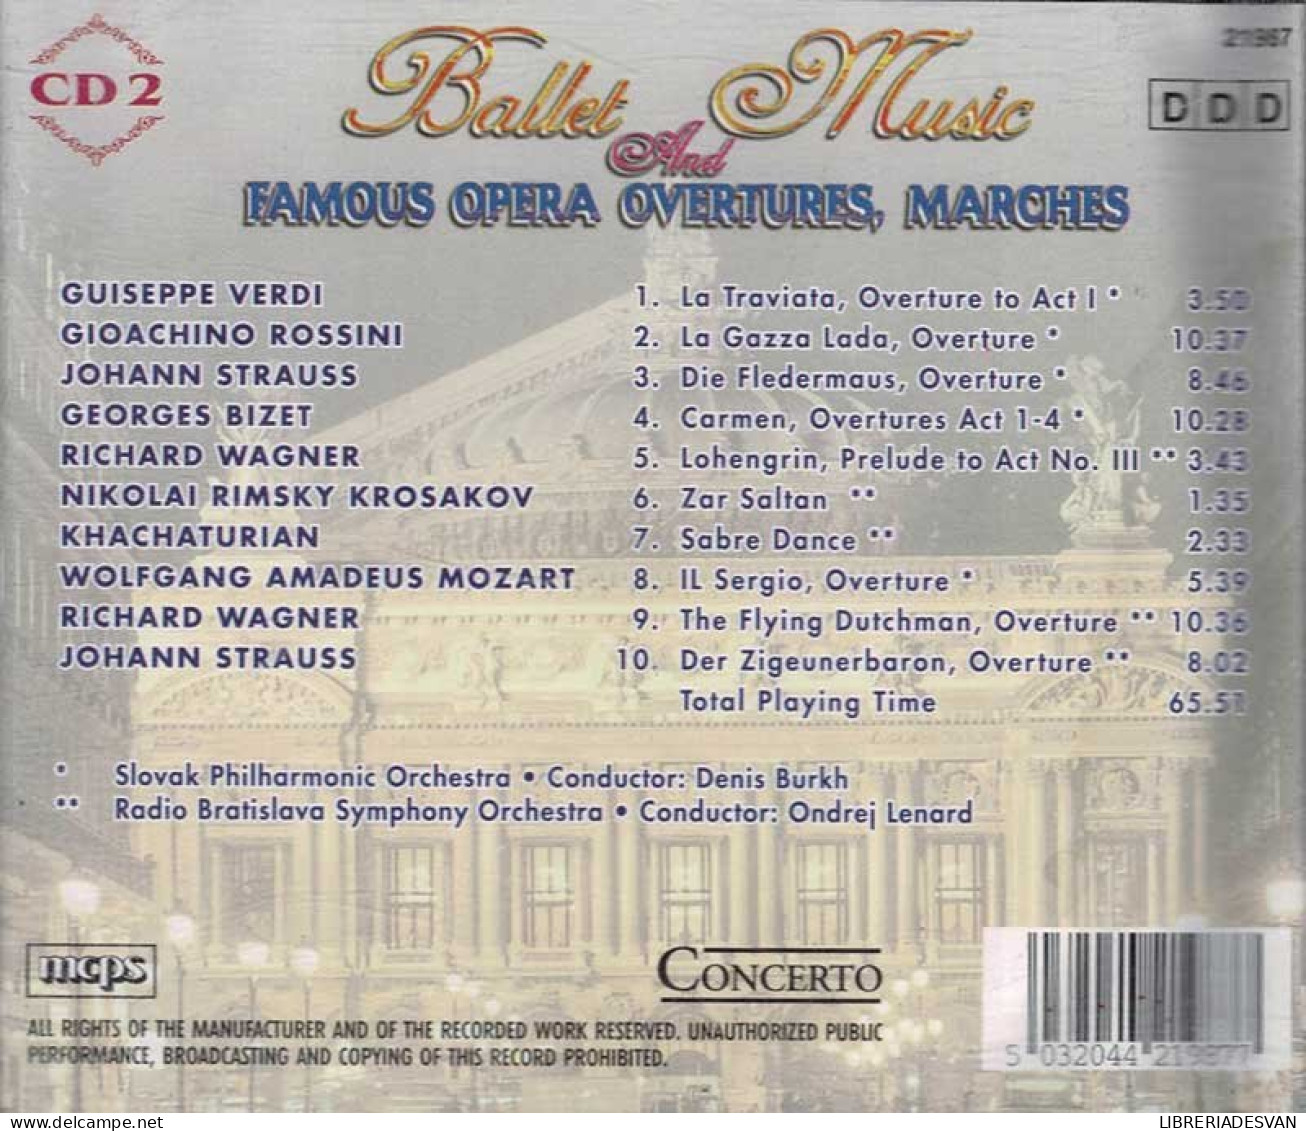 Ballet Music. Famous Opera, Overtures, Marches. CD 2 - Classical